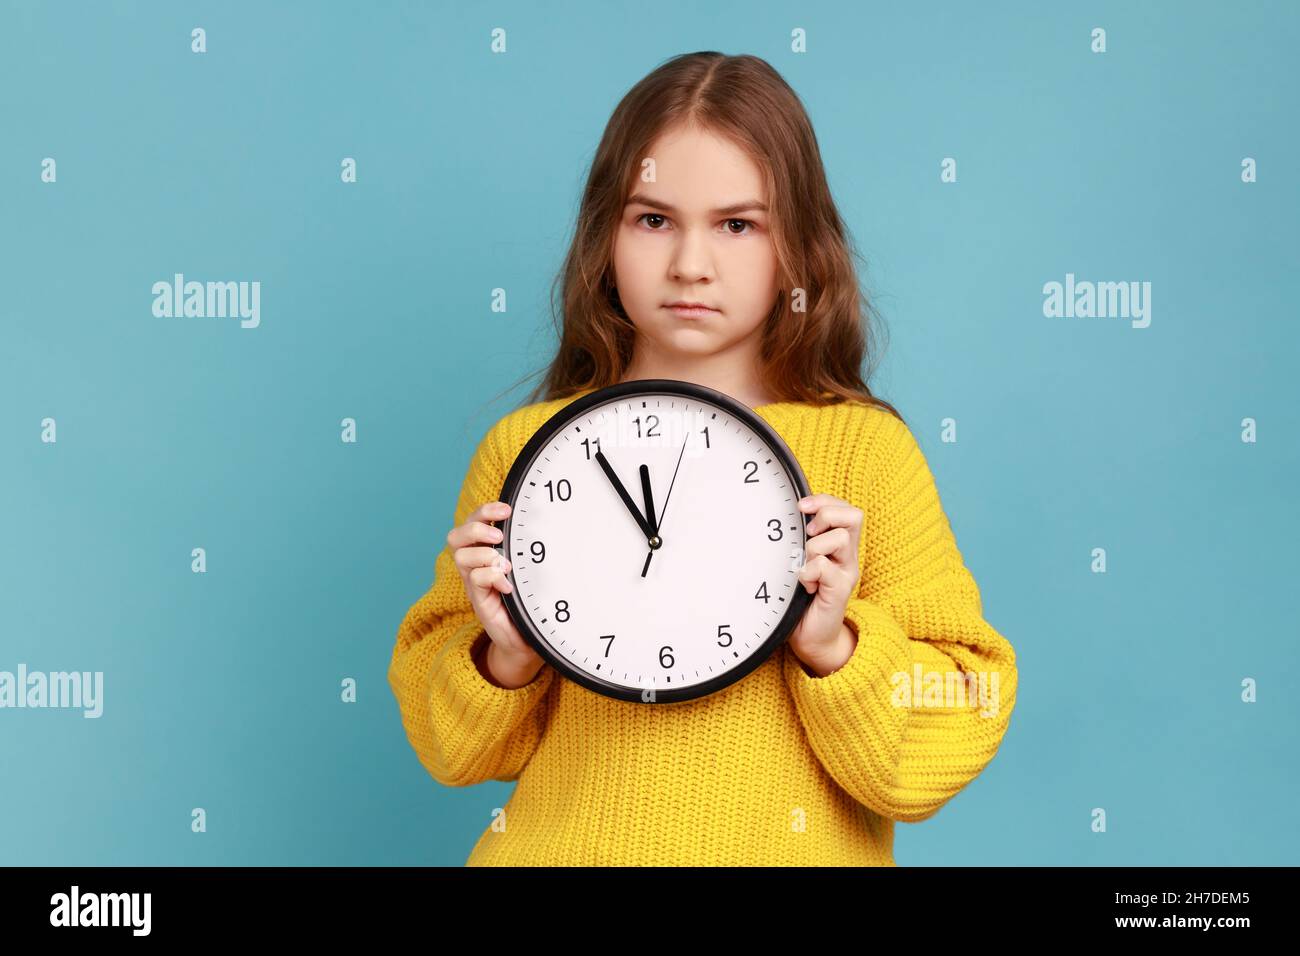 Portrait of little girl holding big wall clock in hands, looking at camera with serious expression, wearing yellow casual style sweater. Indoor studio shot isolated on blue background. Stock Photo